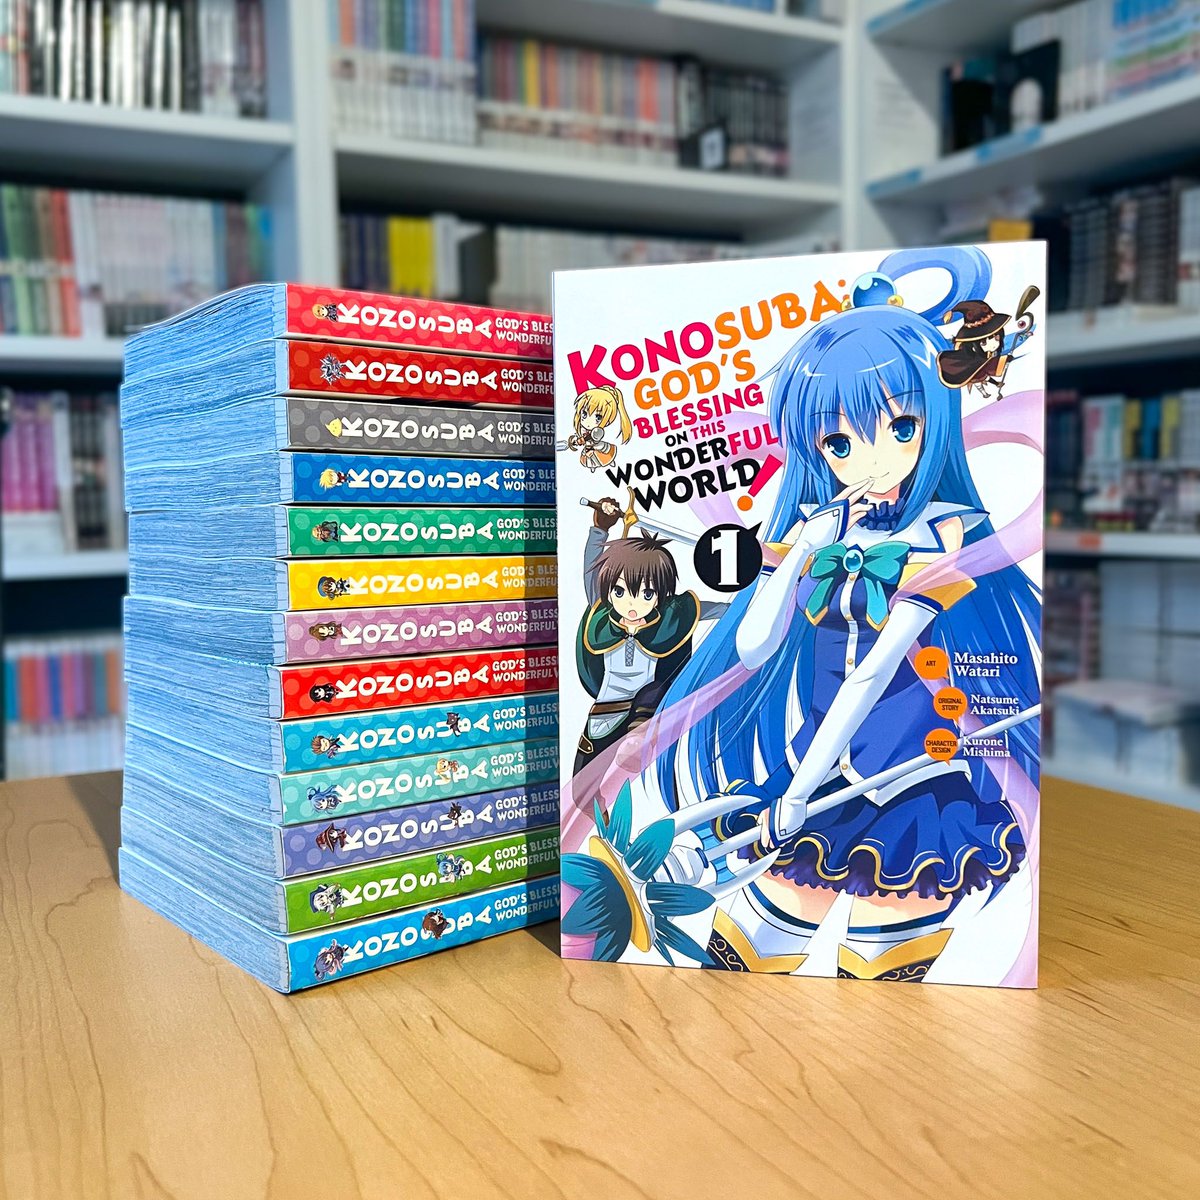 🚨CALLING ALL KONOSUBA FANS🚨 If you haven't heard, a brand new Konosuba visual novel from @PQubeAsia just released! Add to your Konosuba shrine by grabbing the game AND the books, today!🙏 PICK UP THE GAME 👉 buff.ly/49tX6ec PICK UP THE MANGA 👉buff.ly/3OBO1YI